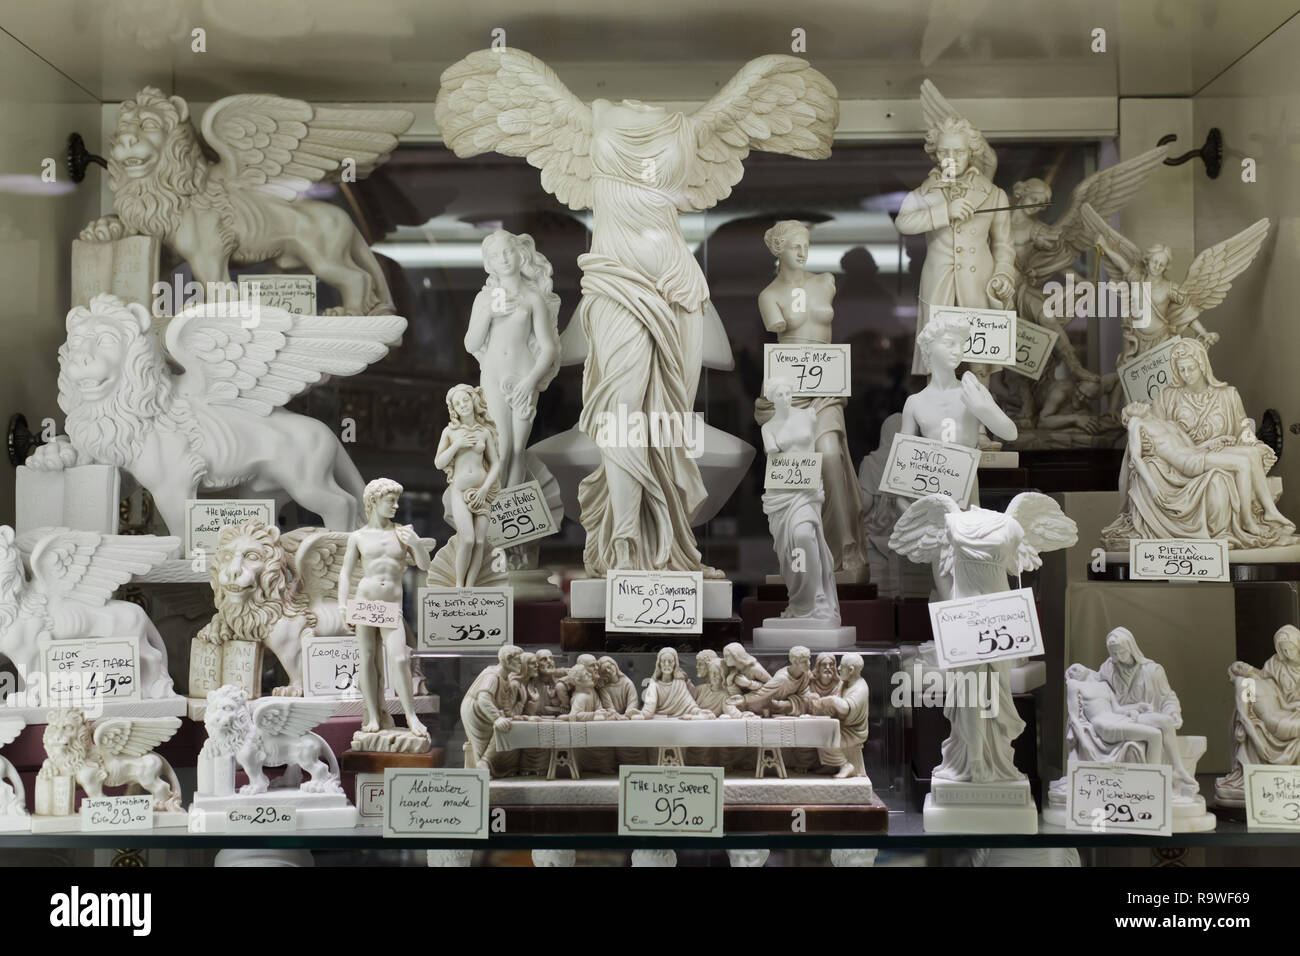 Hand made alabaster statuettes on sale in a souvenir shop in Venice, Italy.  Statuettes of Winged Nike of Samothrace, Aphrodite of Milos, David by  Michelangelo Buonarroti, Venus by Sandro Botticelli, Last Supper